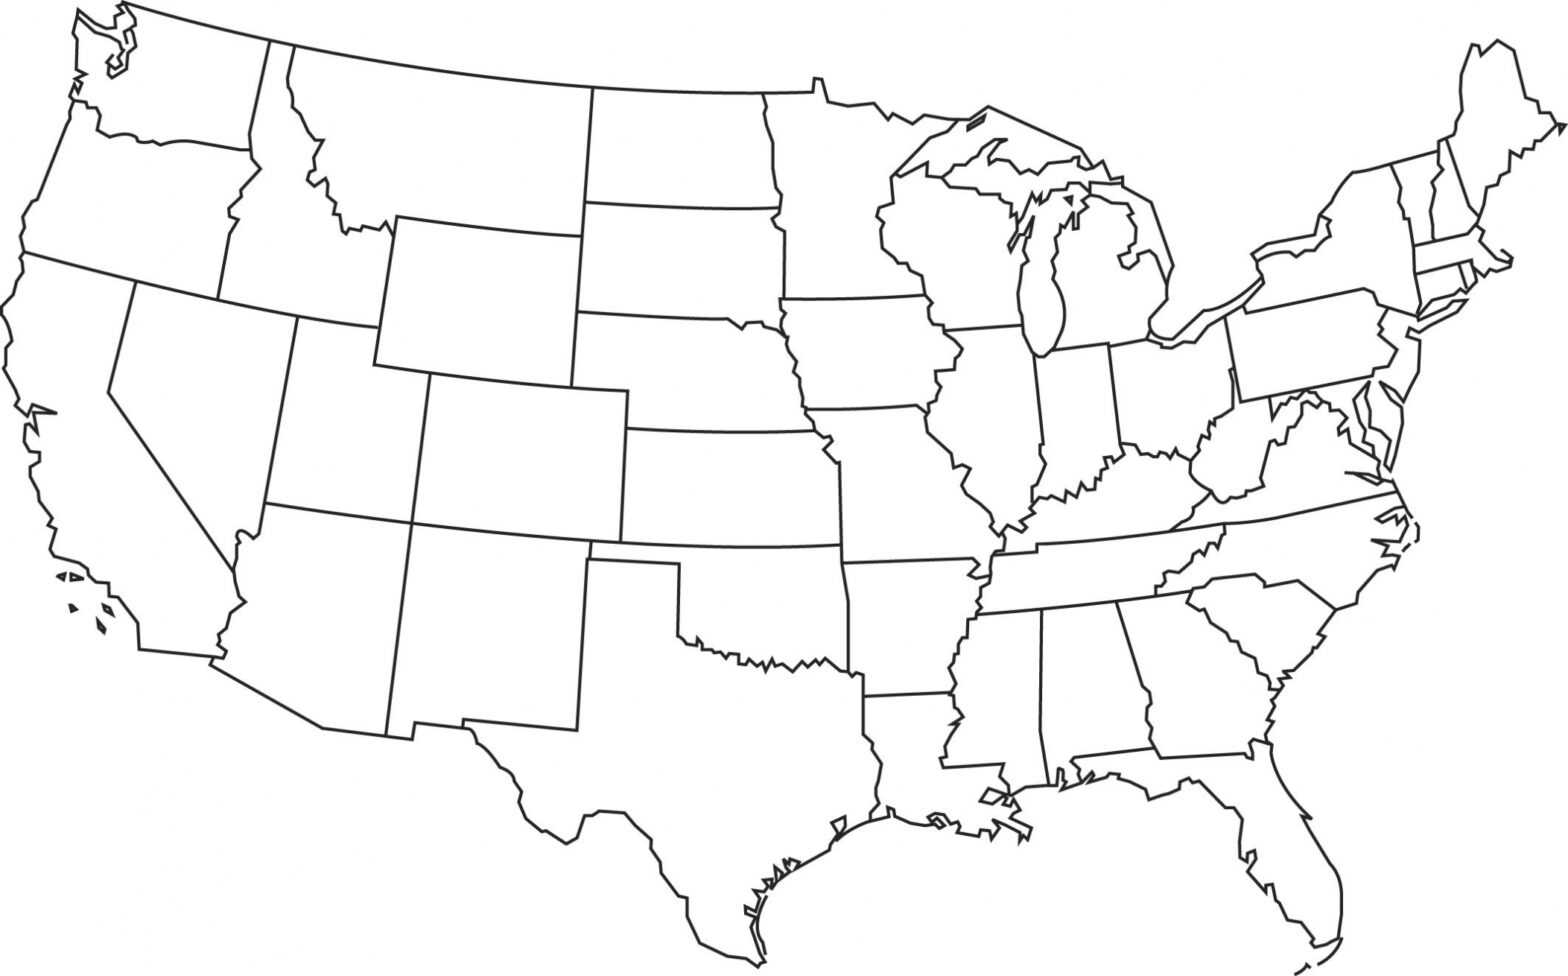 Coloring : Blank Template Of The United States Akali Us with regard to Blank Template Of The United States